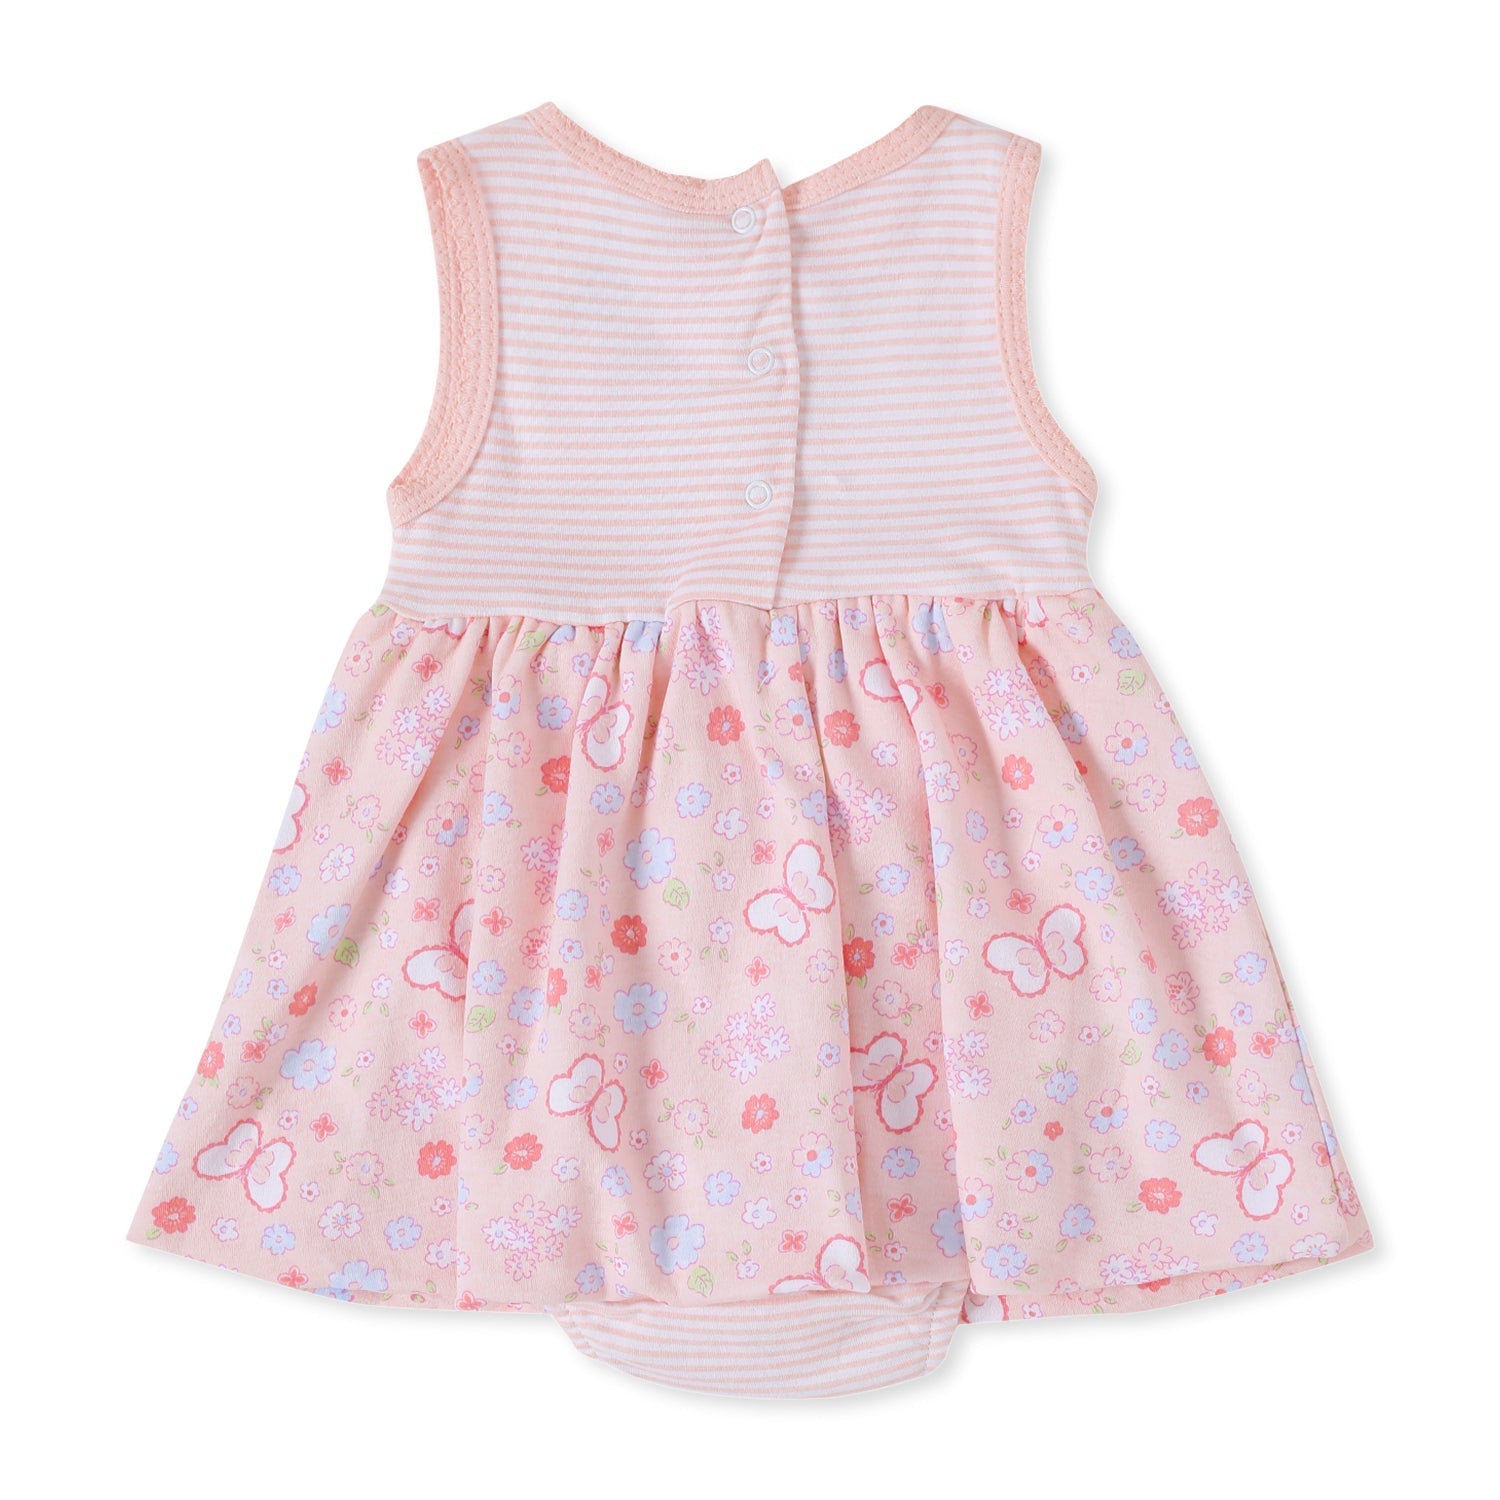 Giggles & Wiggles Little Beauty Blossom Pink Floral Dress With Accessories